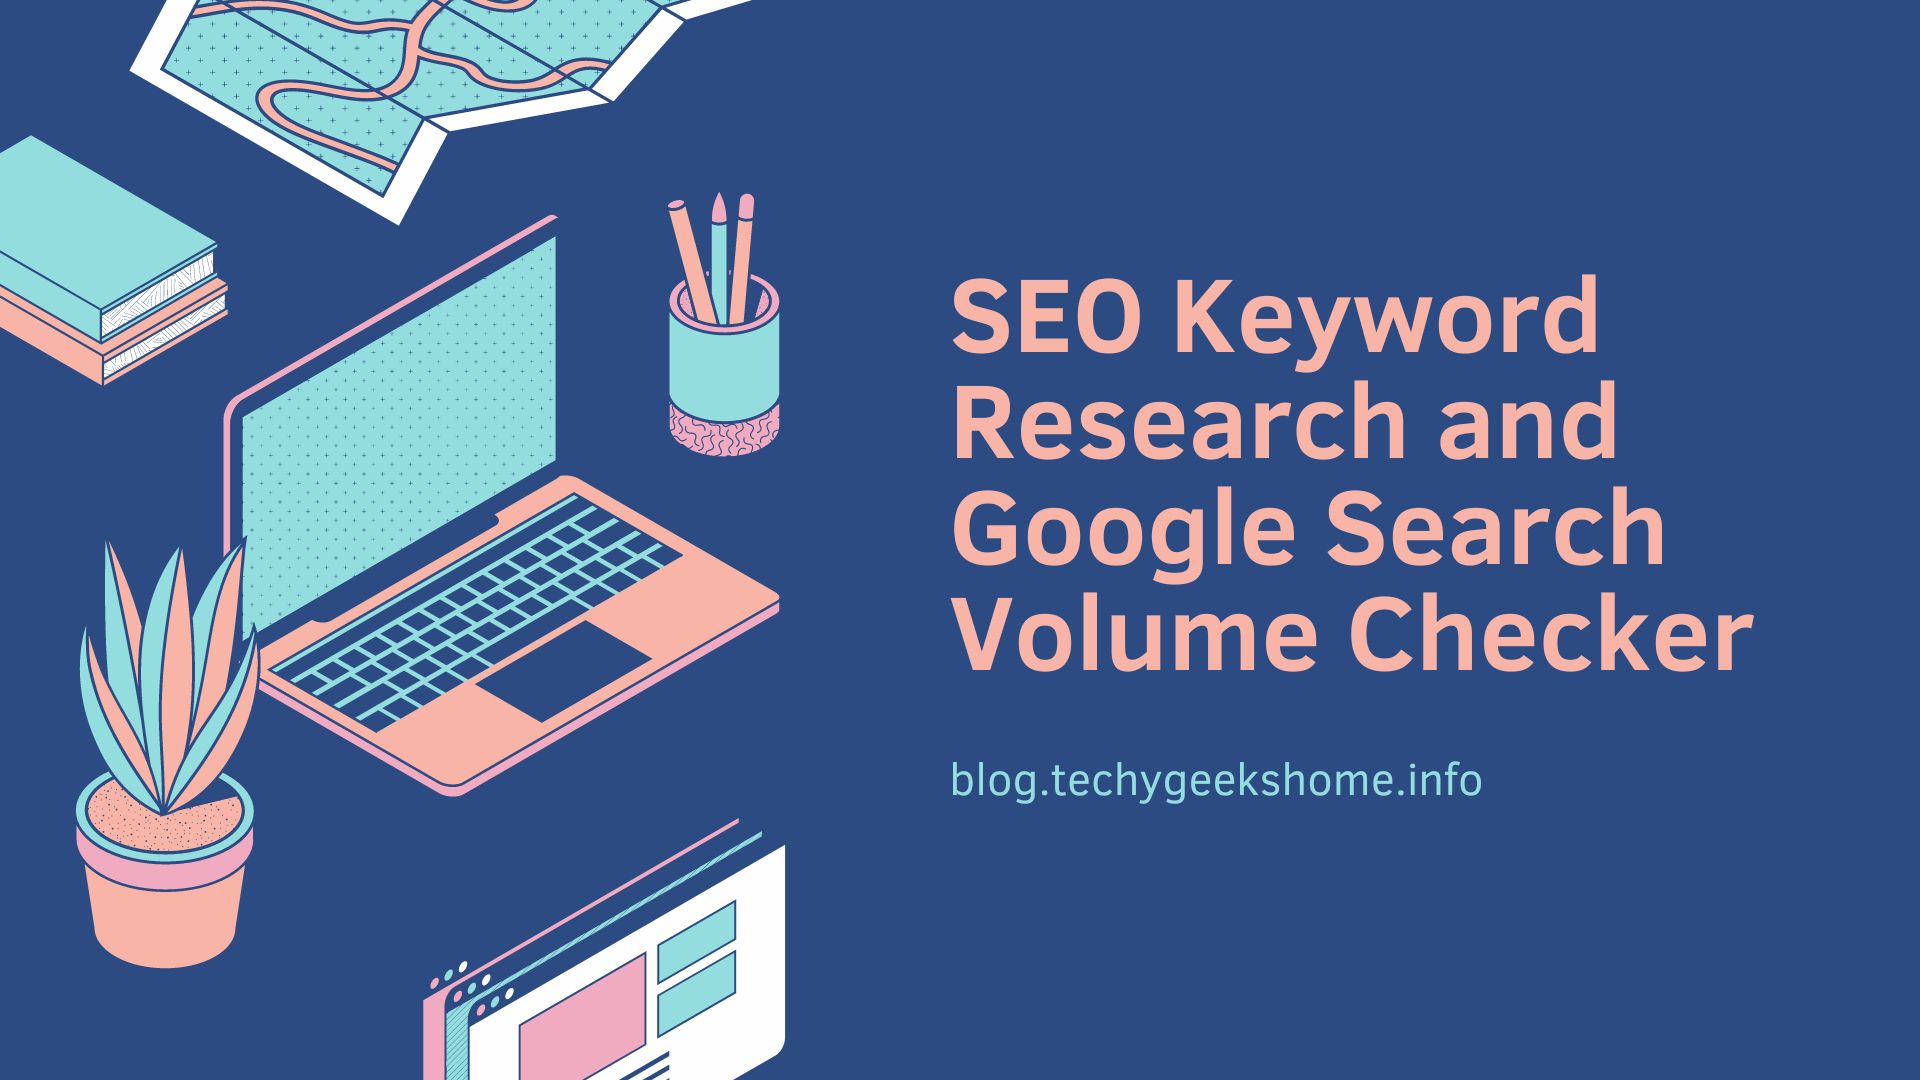 SEO Keyword Research and Google Search Volume Checker 5